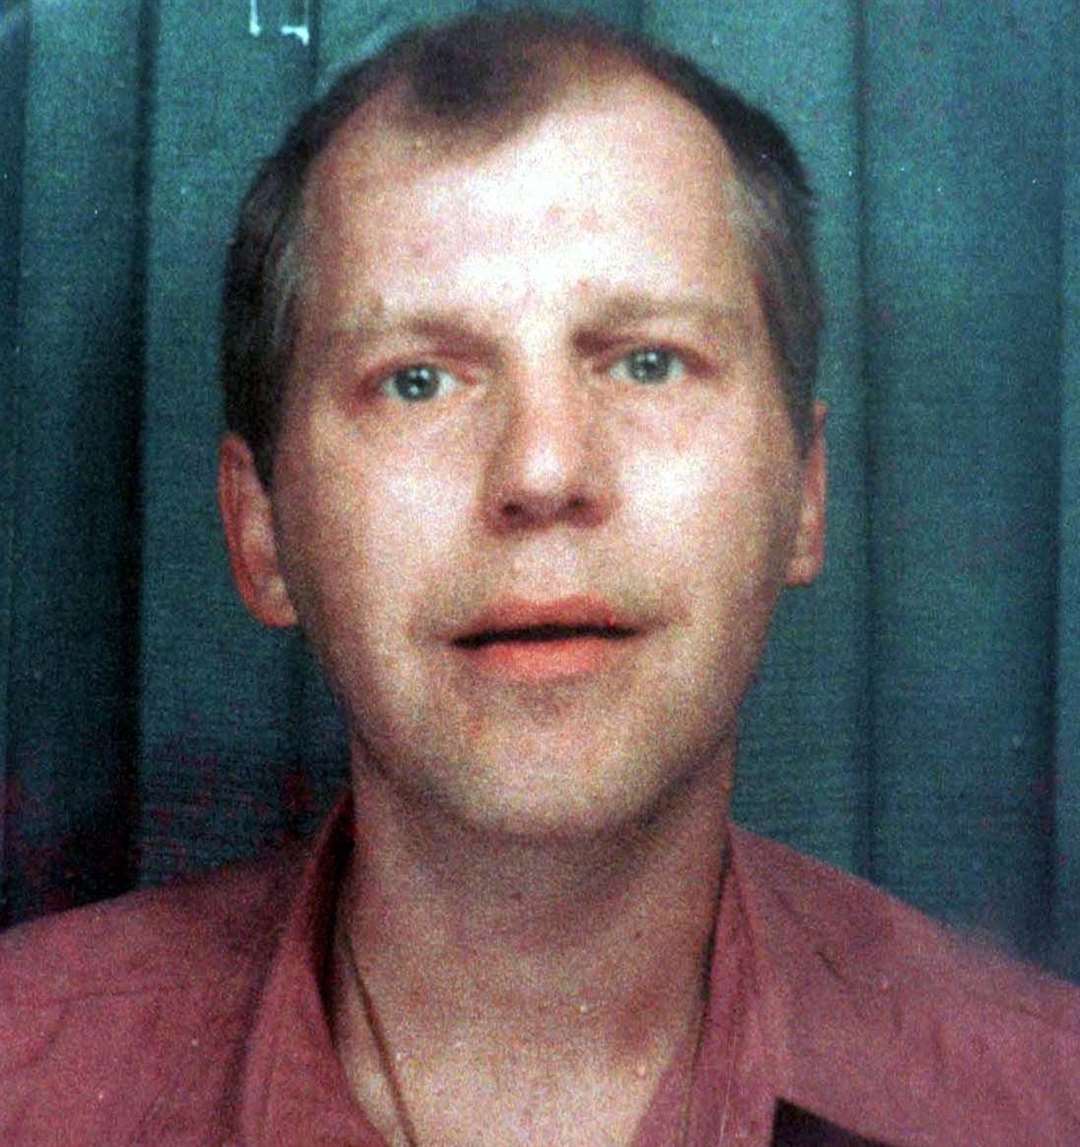 Michael Stone is serving life for the Russell murders